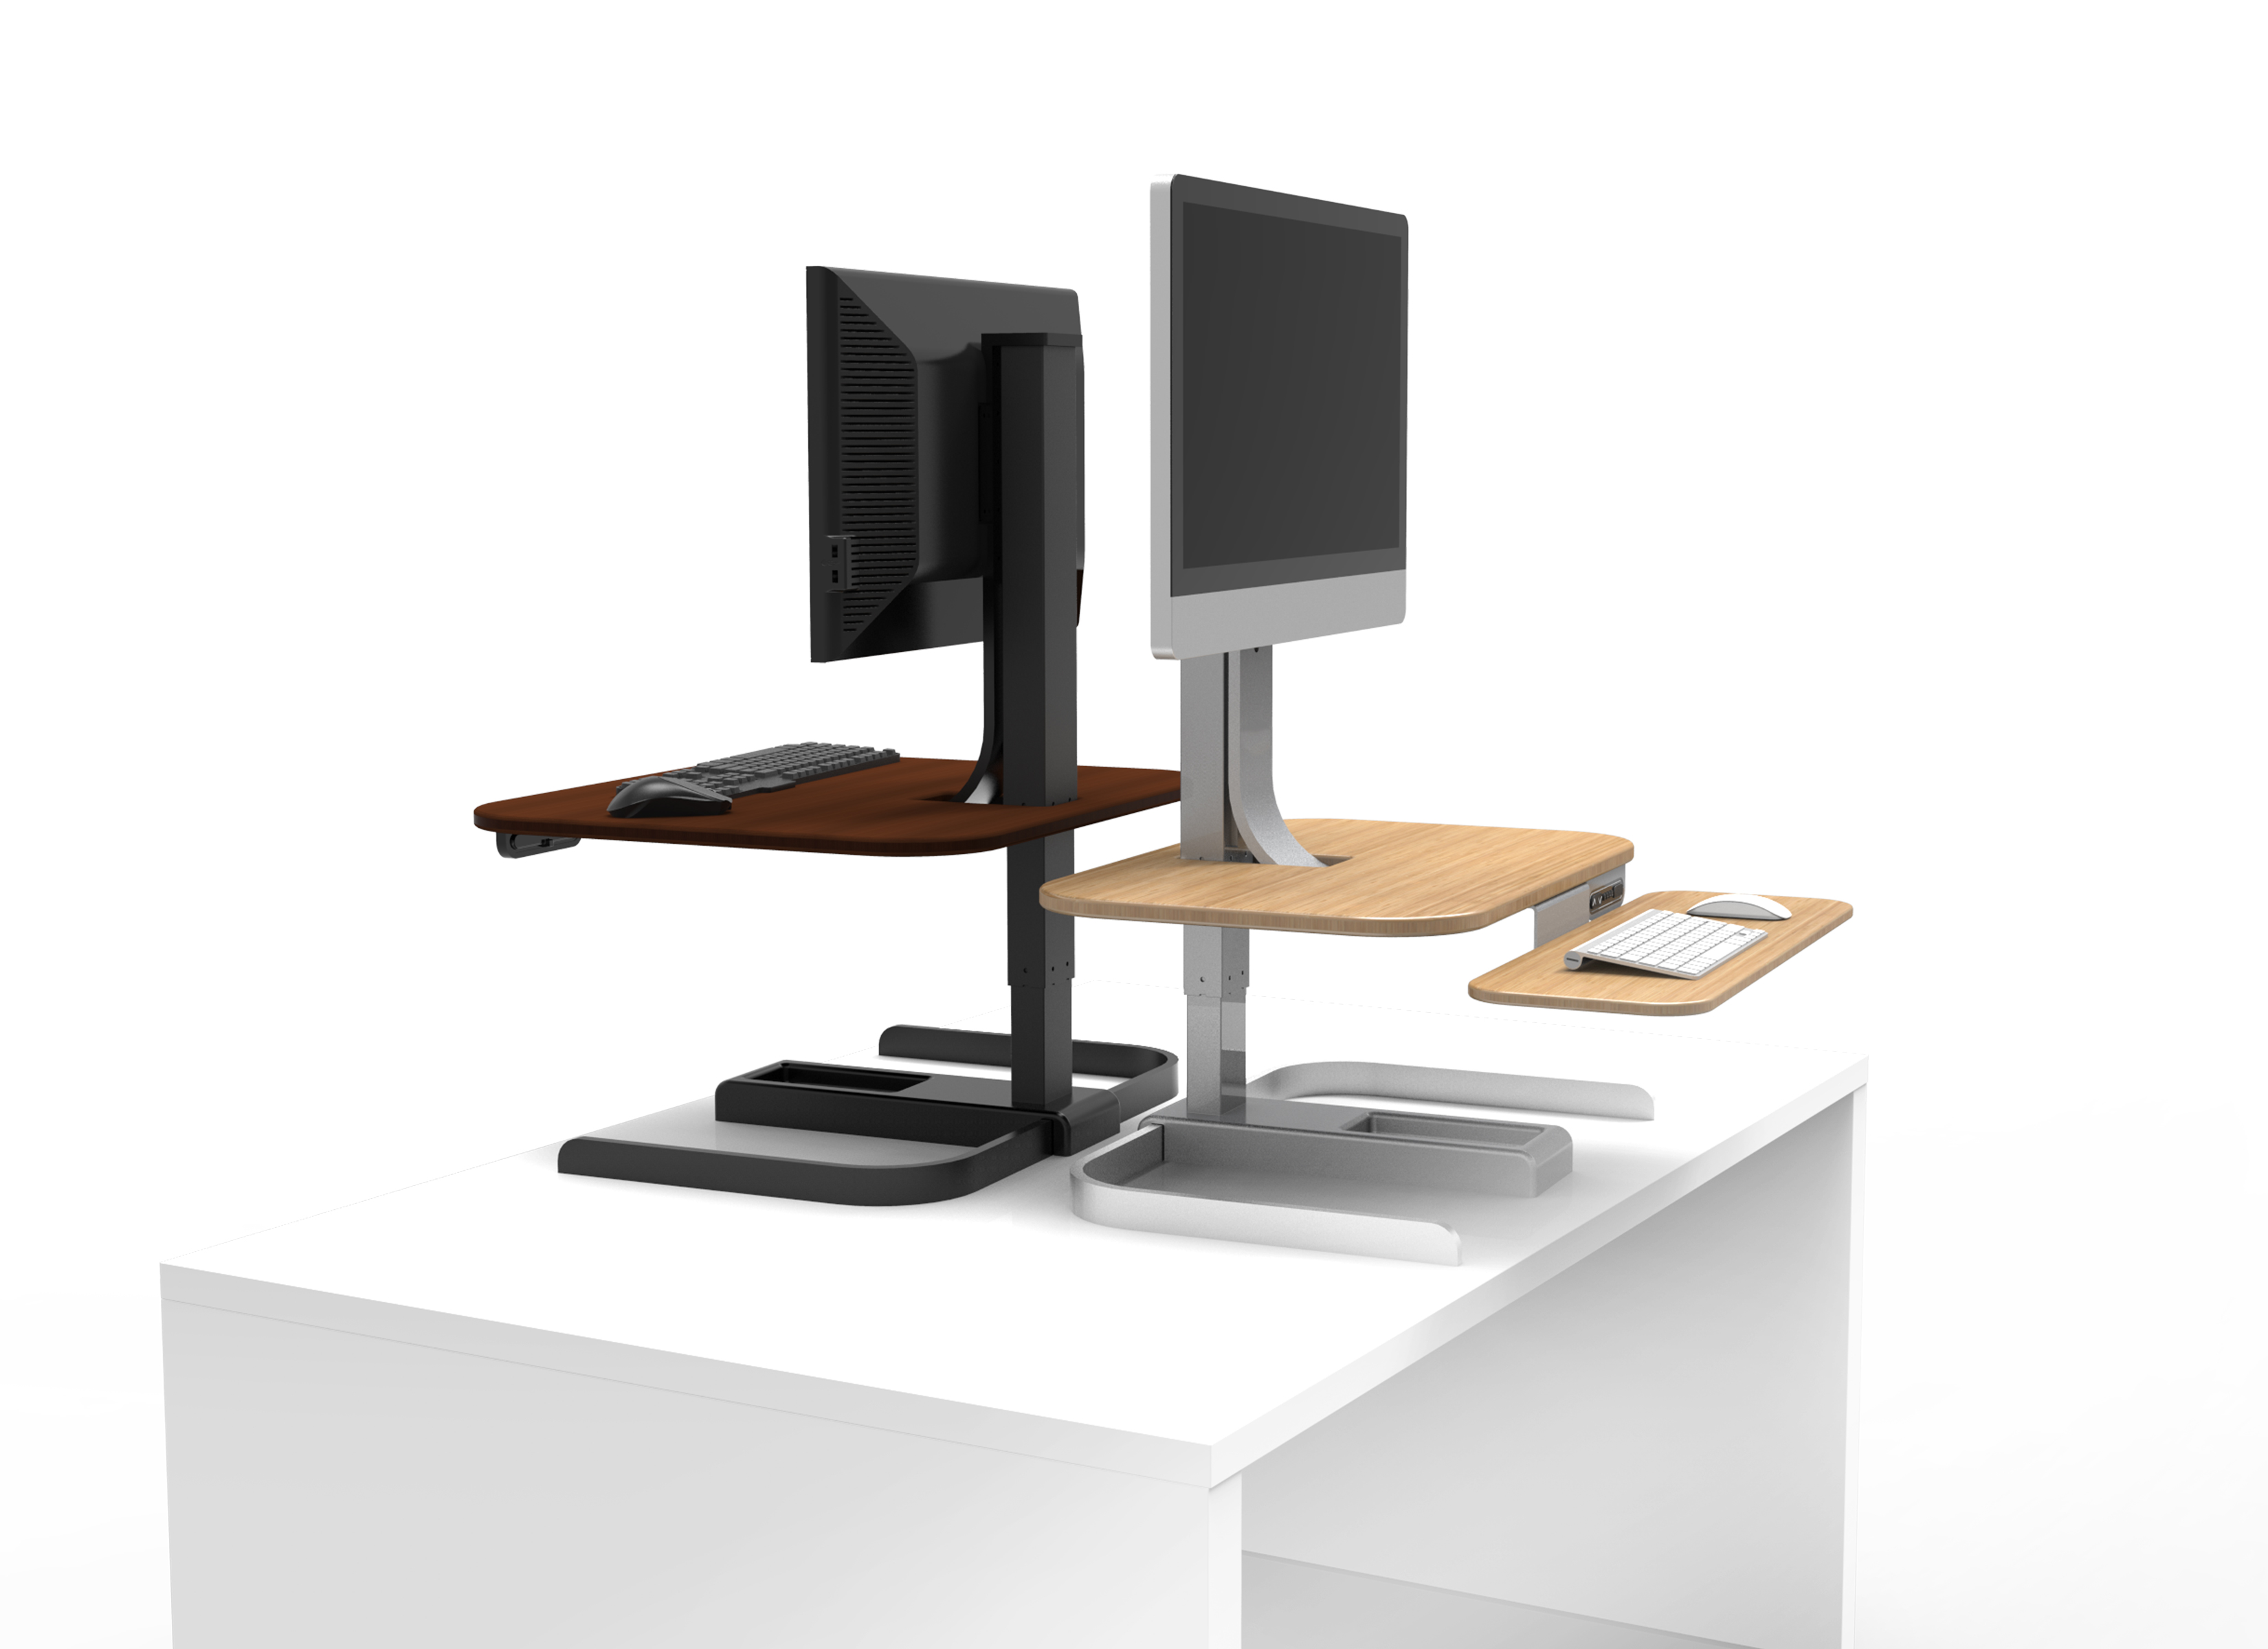 Convert your tired table into a powered standing desk for $400